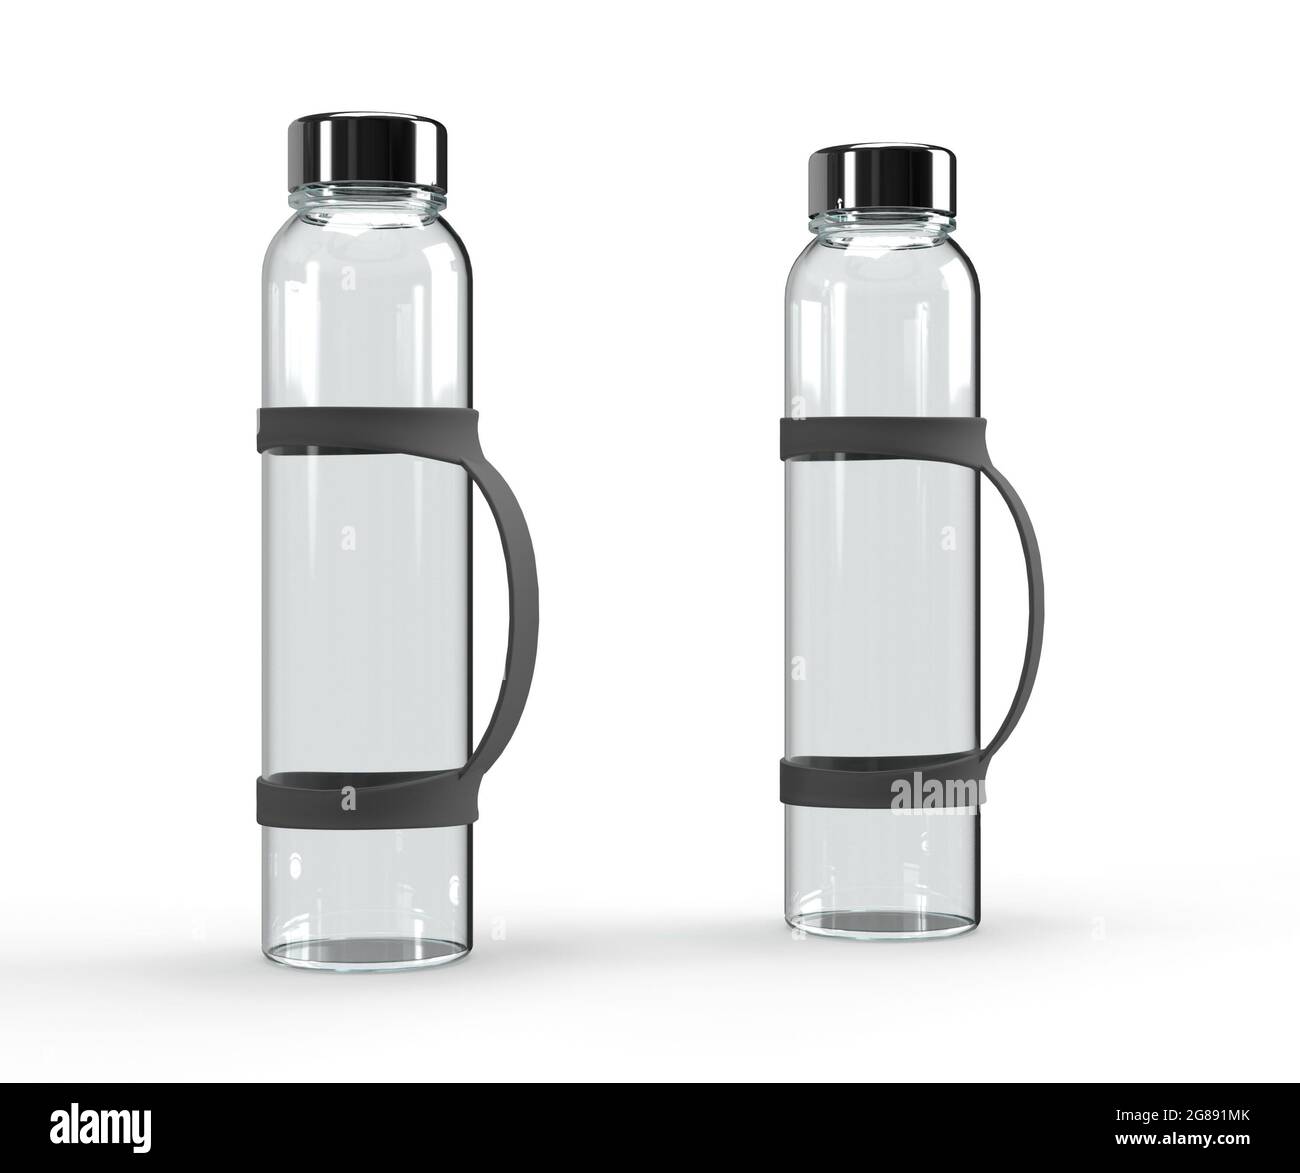 14,818 Small Plastic Water Bottle Images, Stock Photos, 3D objects